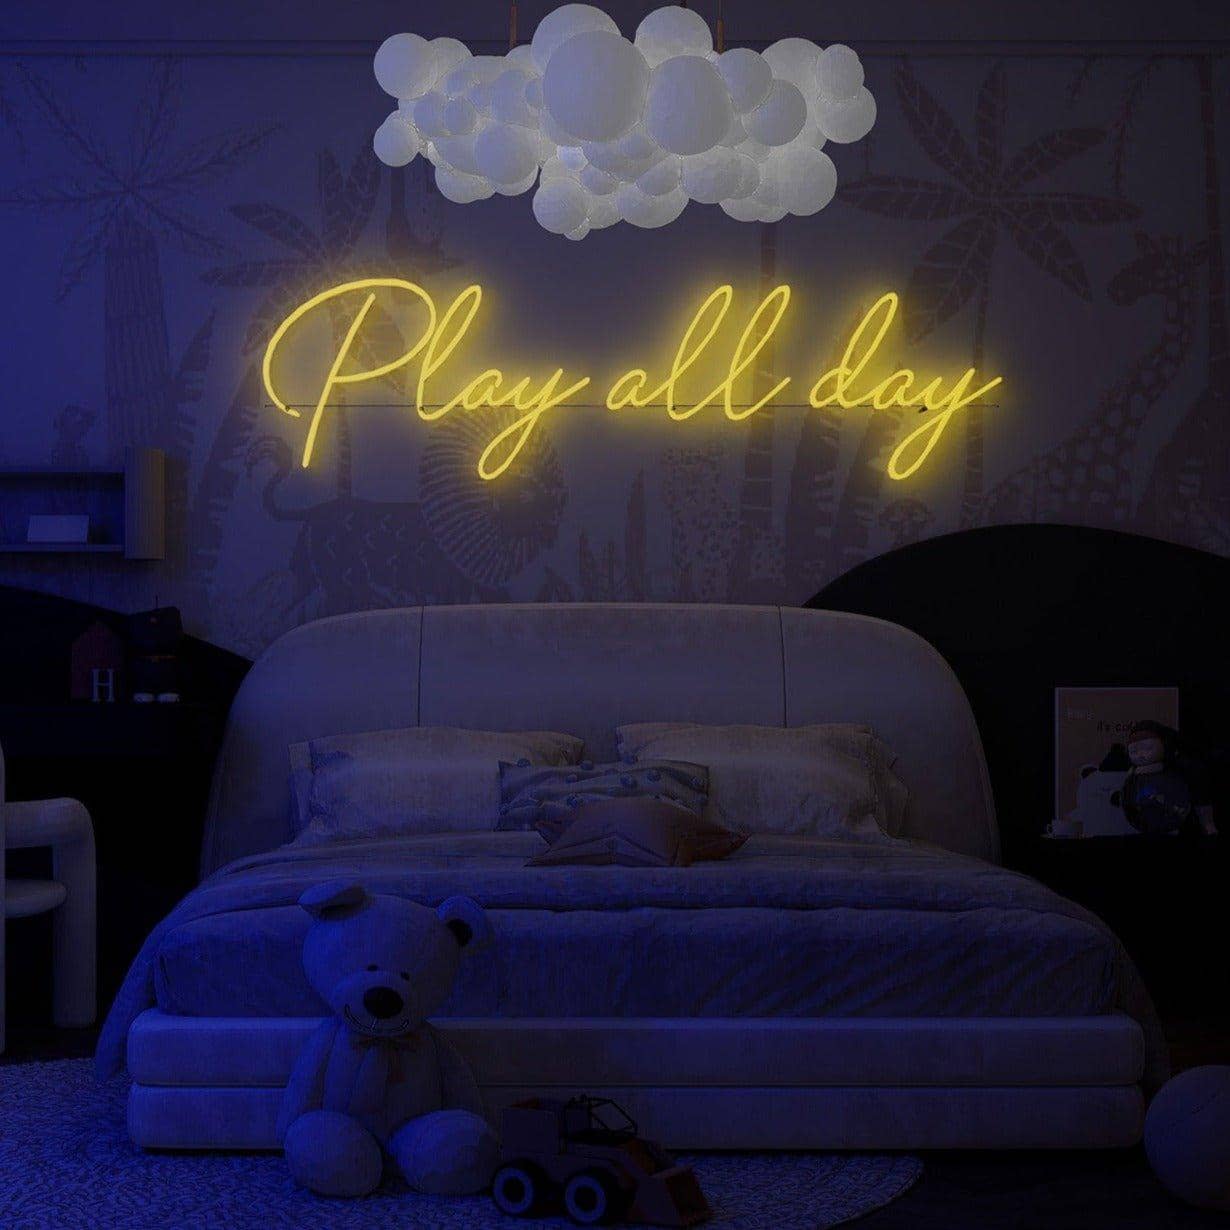 yellow-neon-lights-lit-up-at-night-for-display-in-bedroom-play-all-day